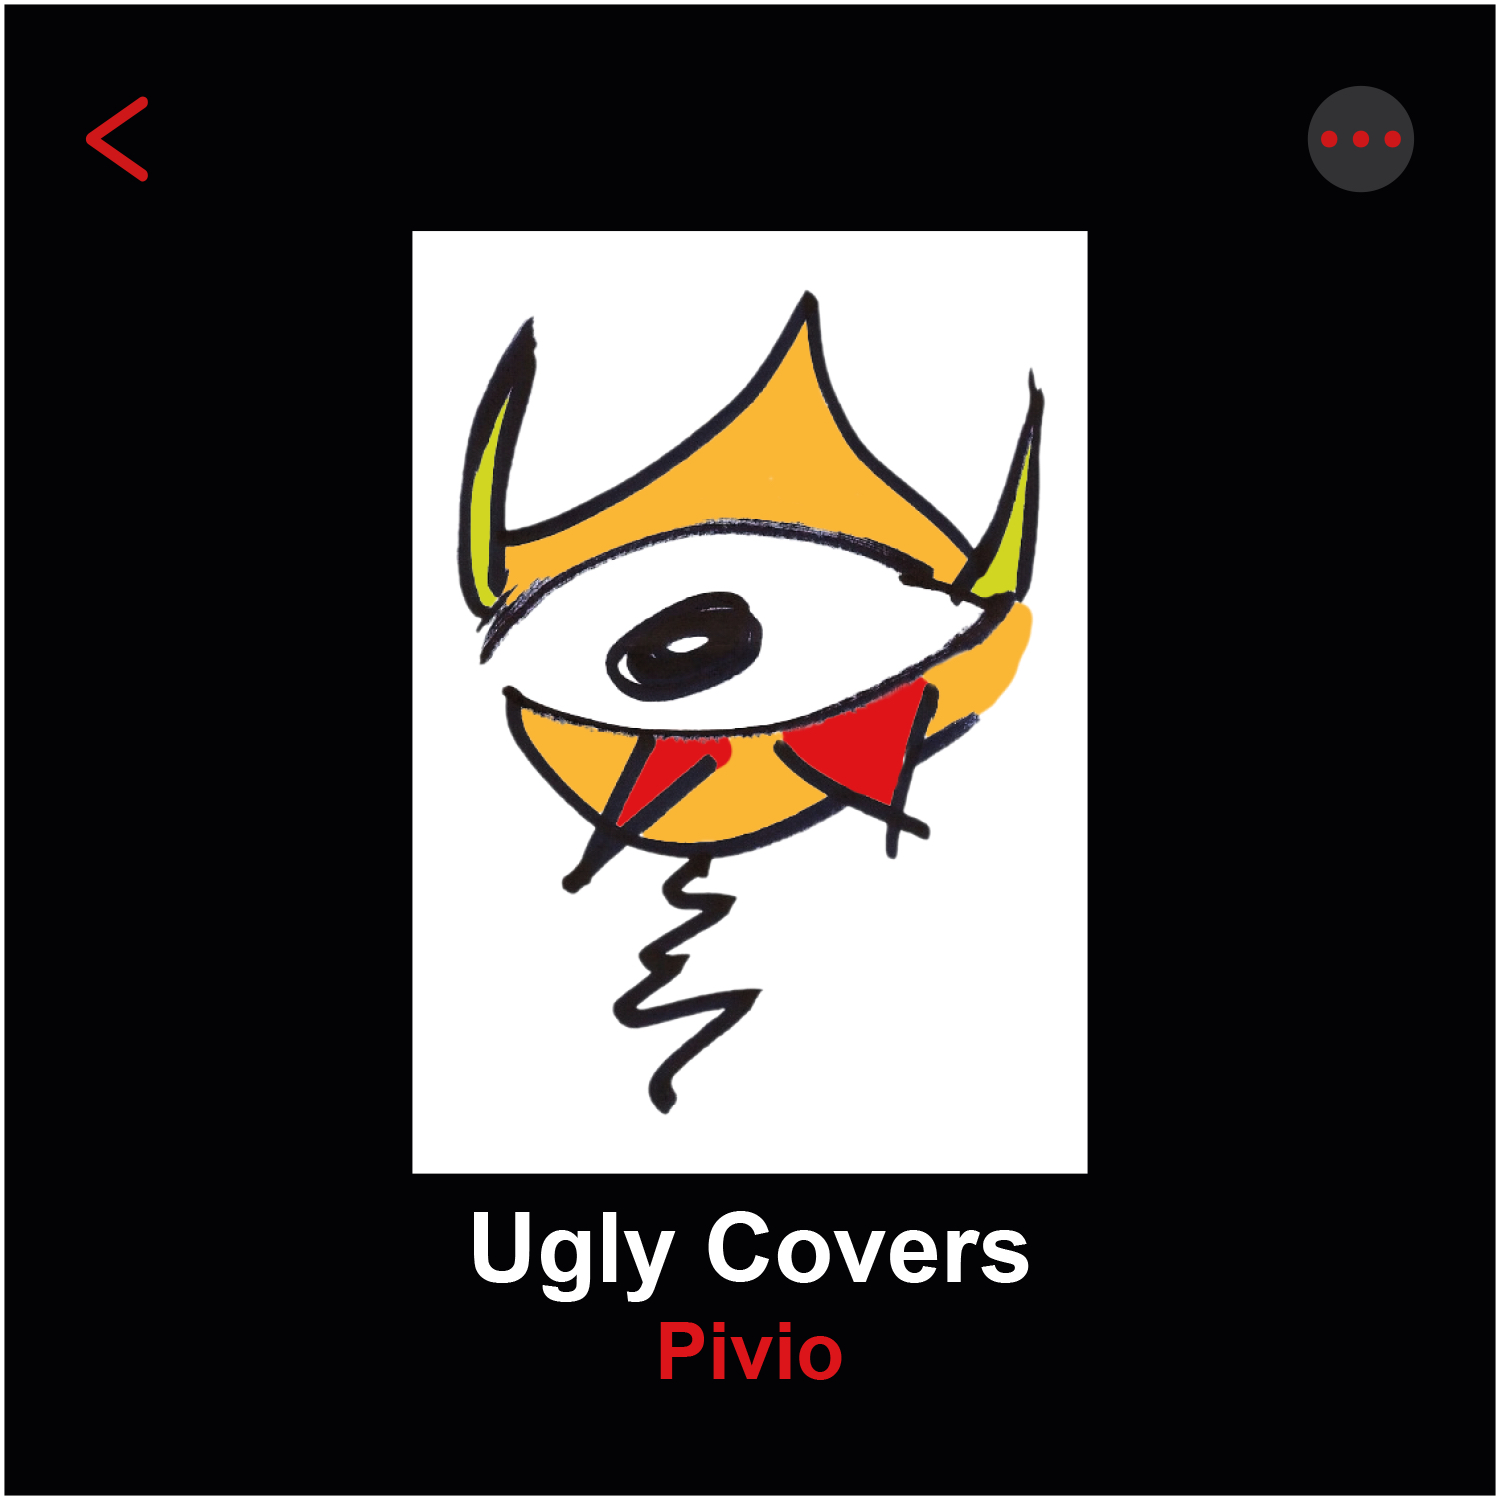 Ugly Covers